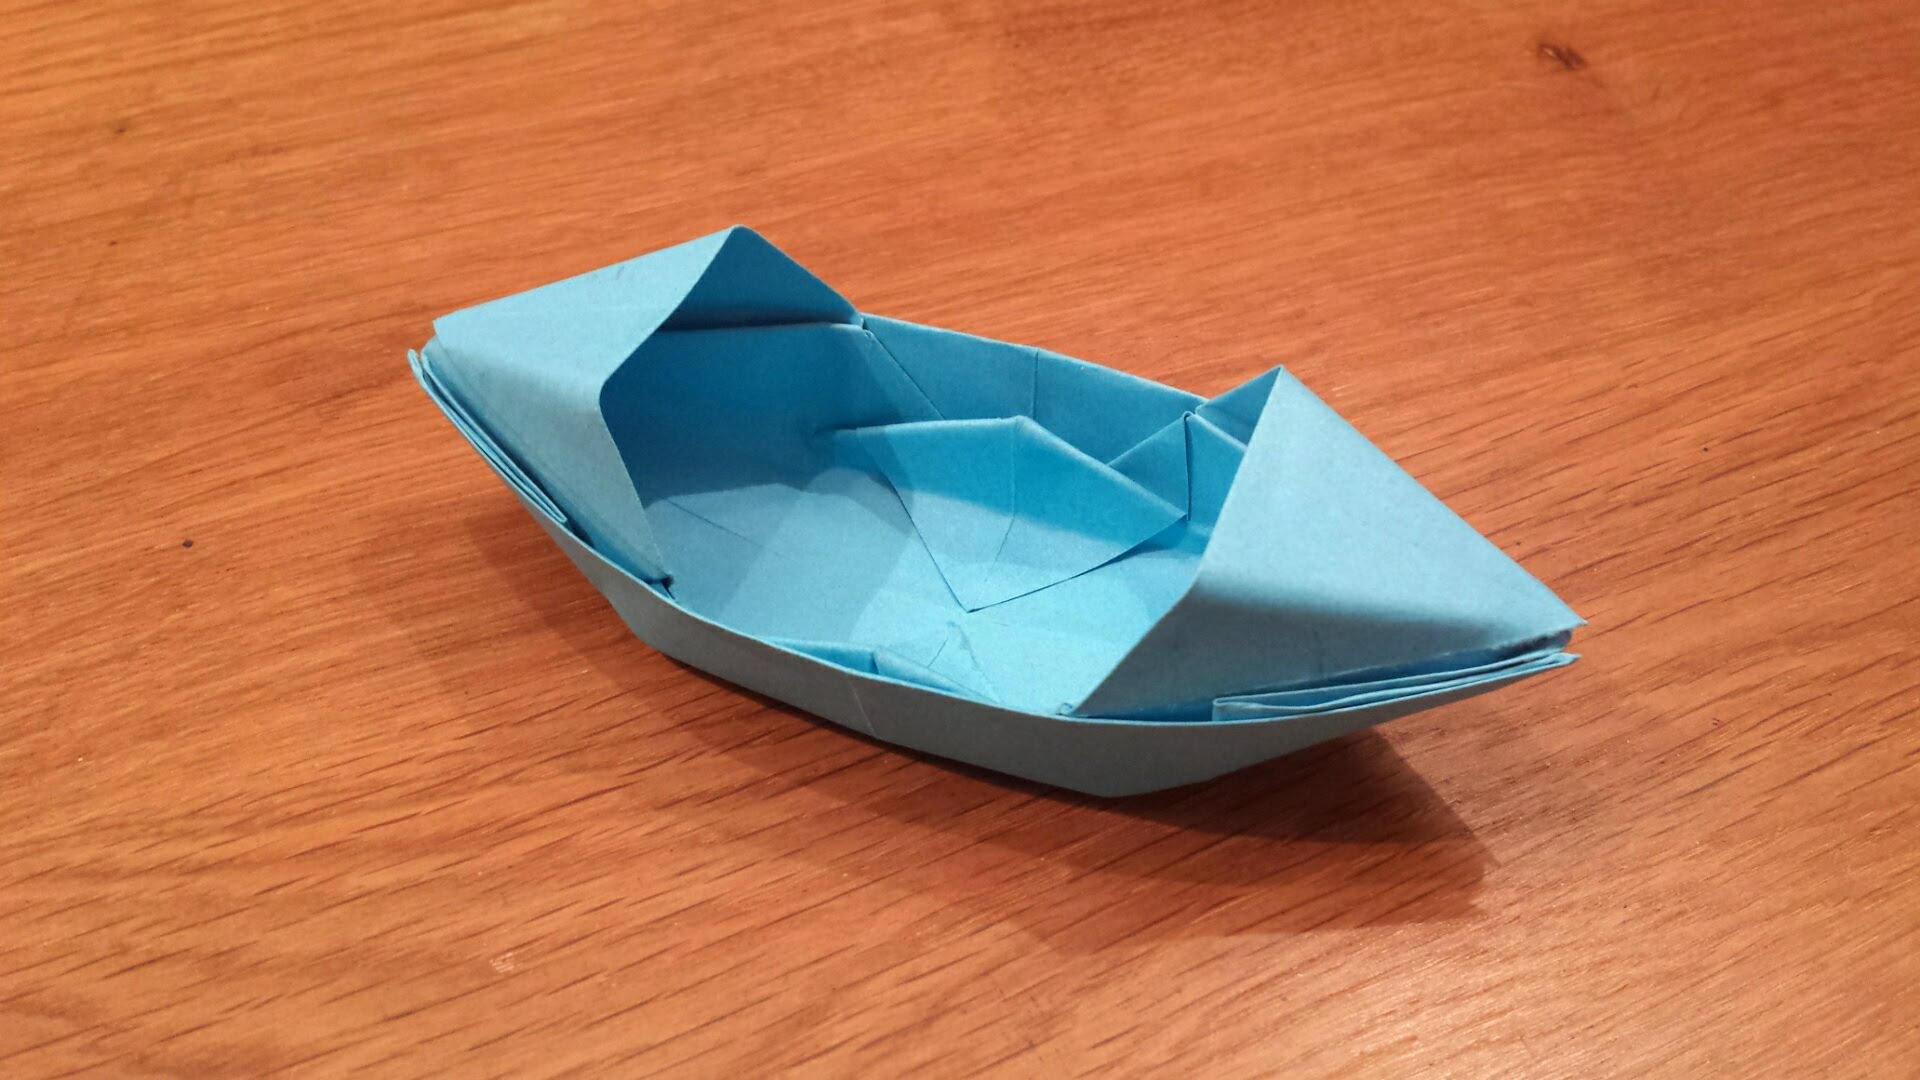 How to make Paper Boat, Ship Step By Step with Image EPaperplanes